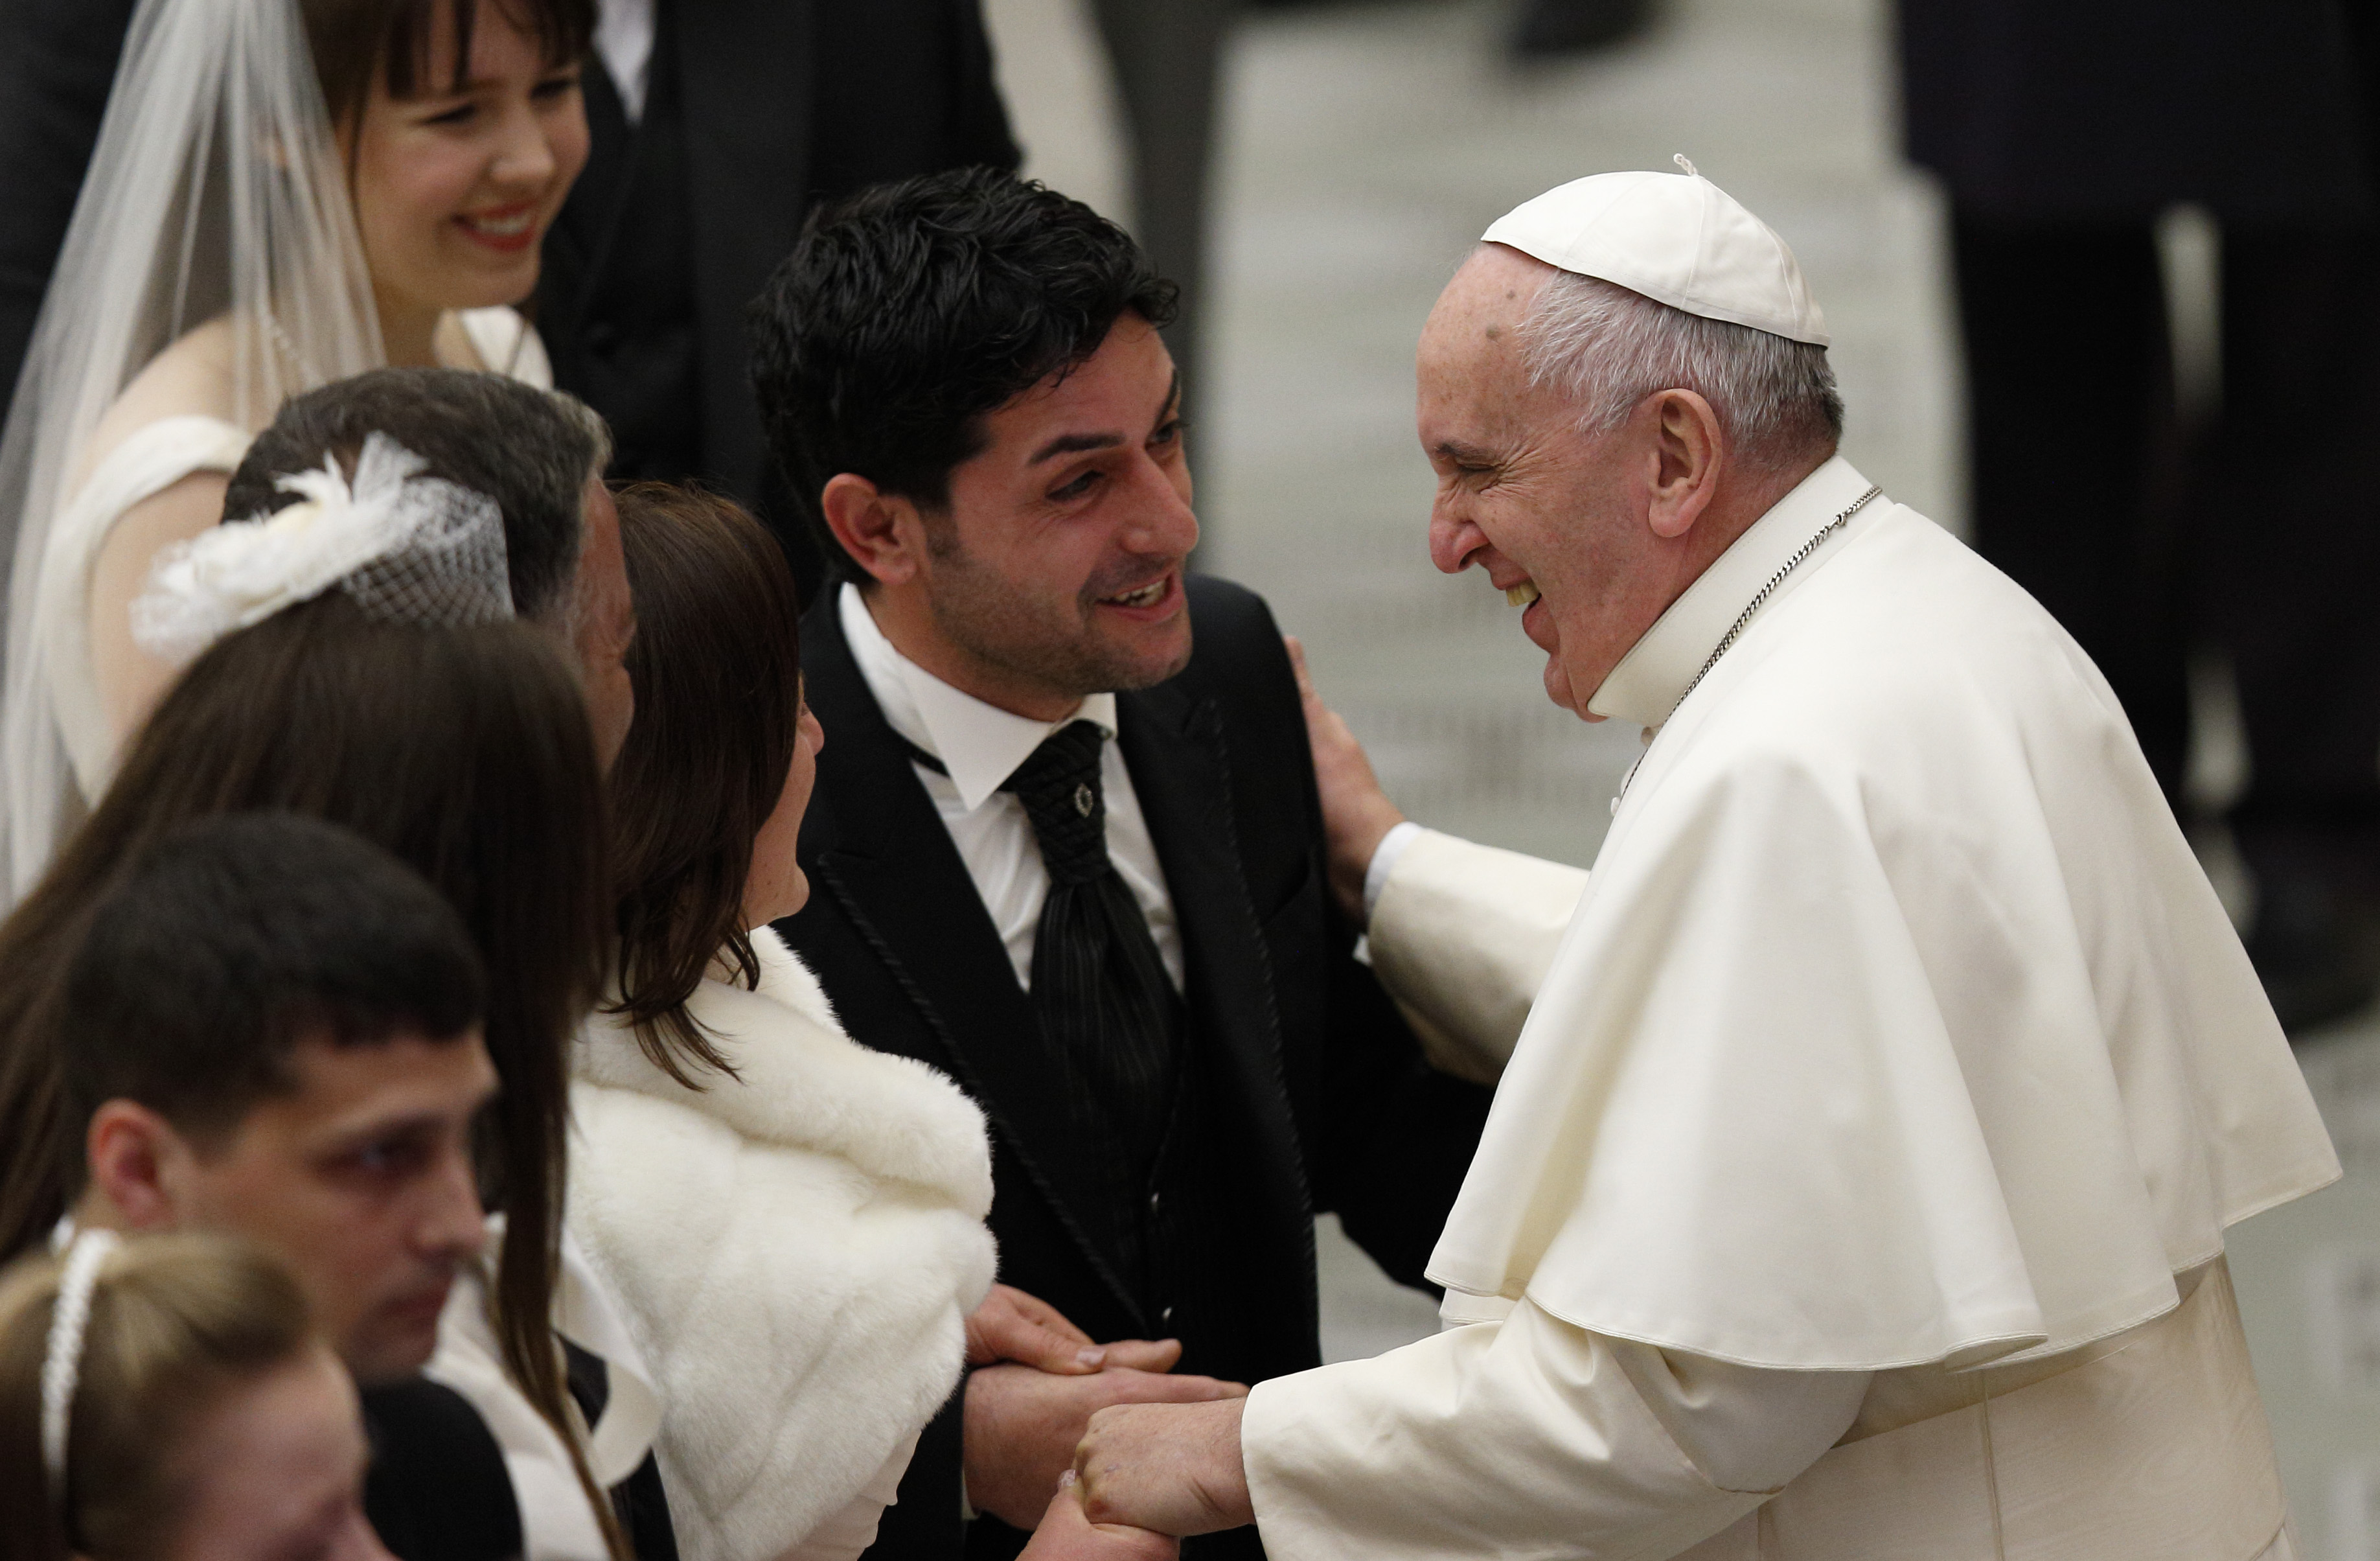 Take a deeper look at Pope Francis statement on marriage and the family photo